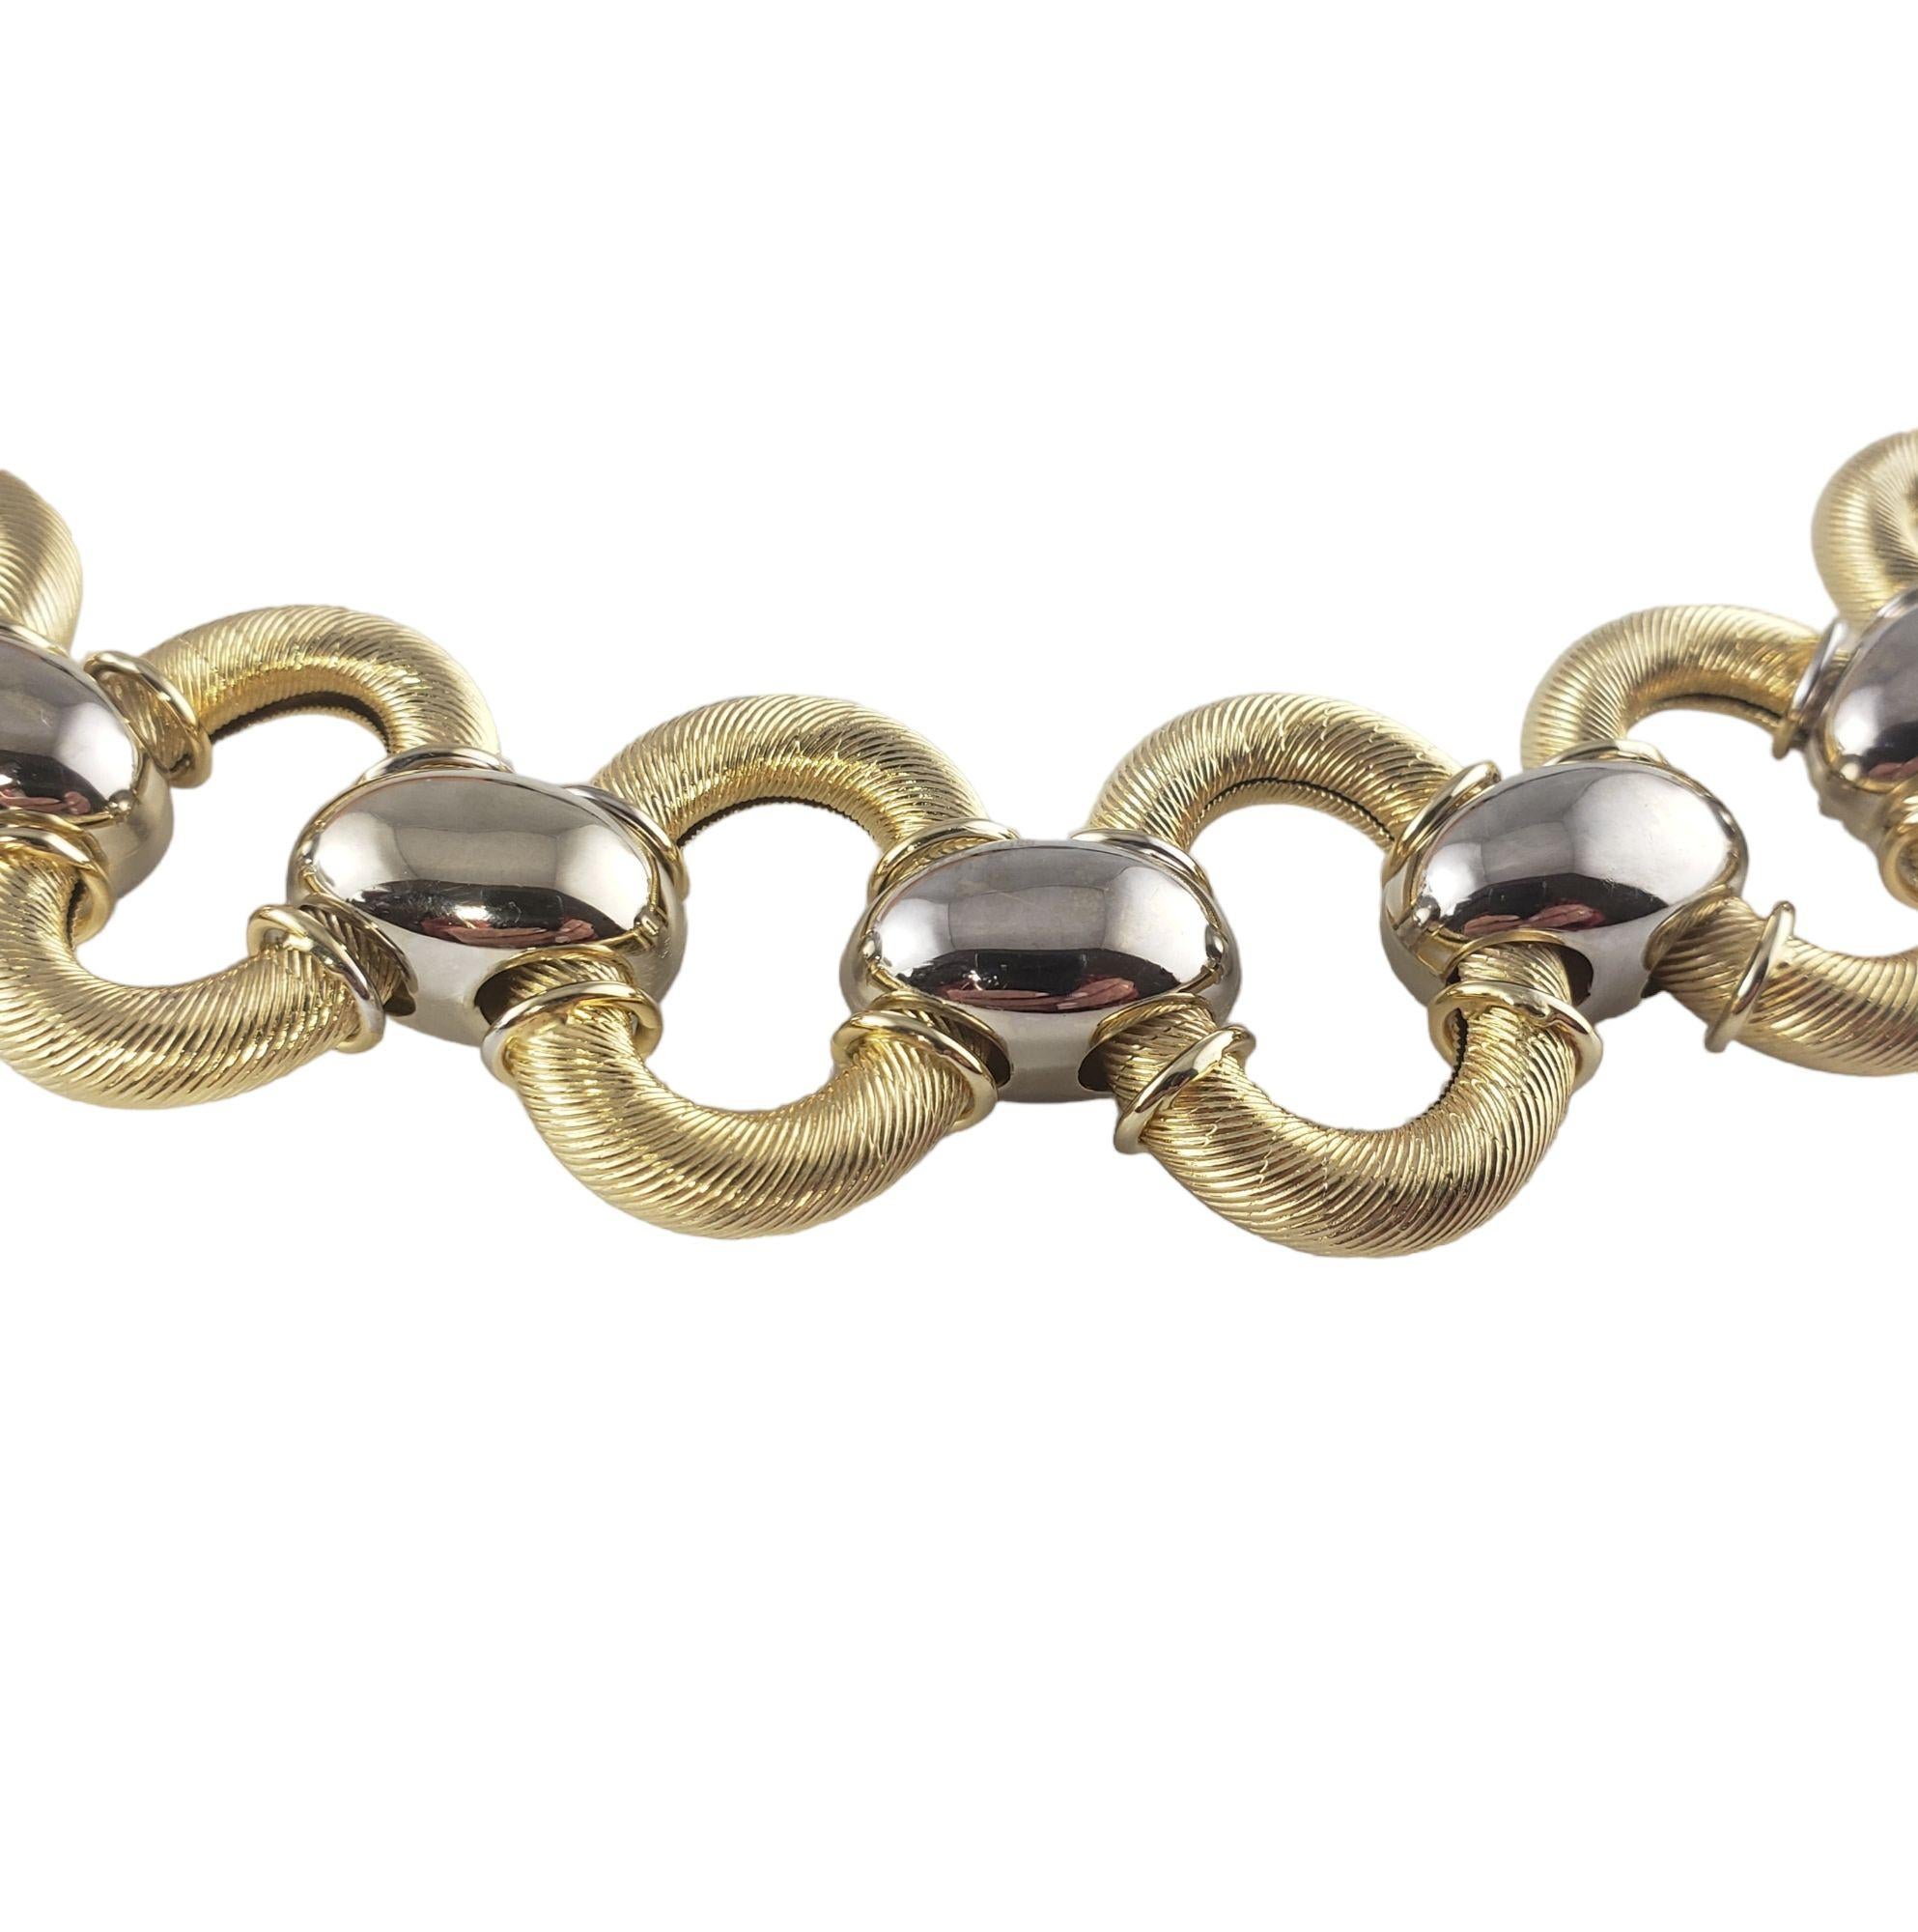 Vintage 14 Karat Two Tone Gold Link Bracelet-

This stunning link bracelet is crafted in beautifully detailed 14K yellow and white gold. Width: 25 mm.

Size: 6.75 inches

Weight: 23.5 dwt. / 36.6 gr.

Stamped: 14K 1758AR Italy

Very good condition,